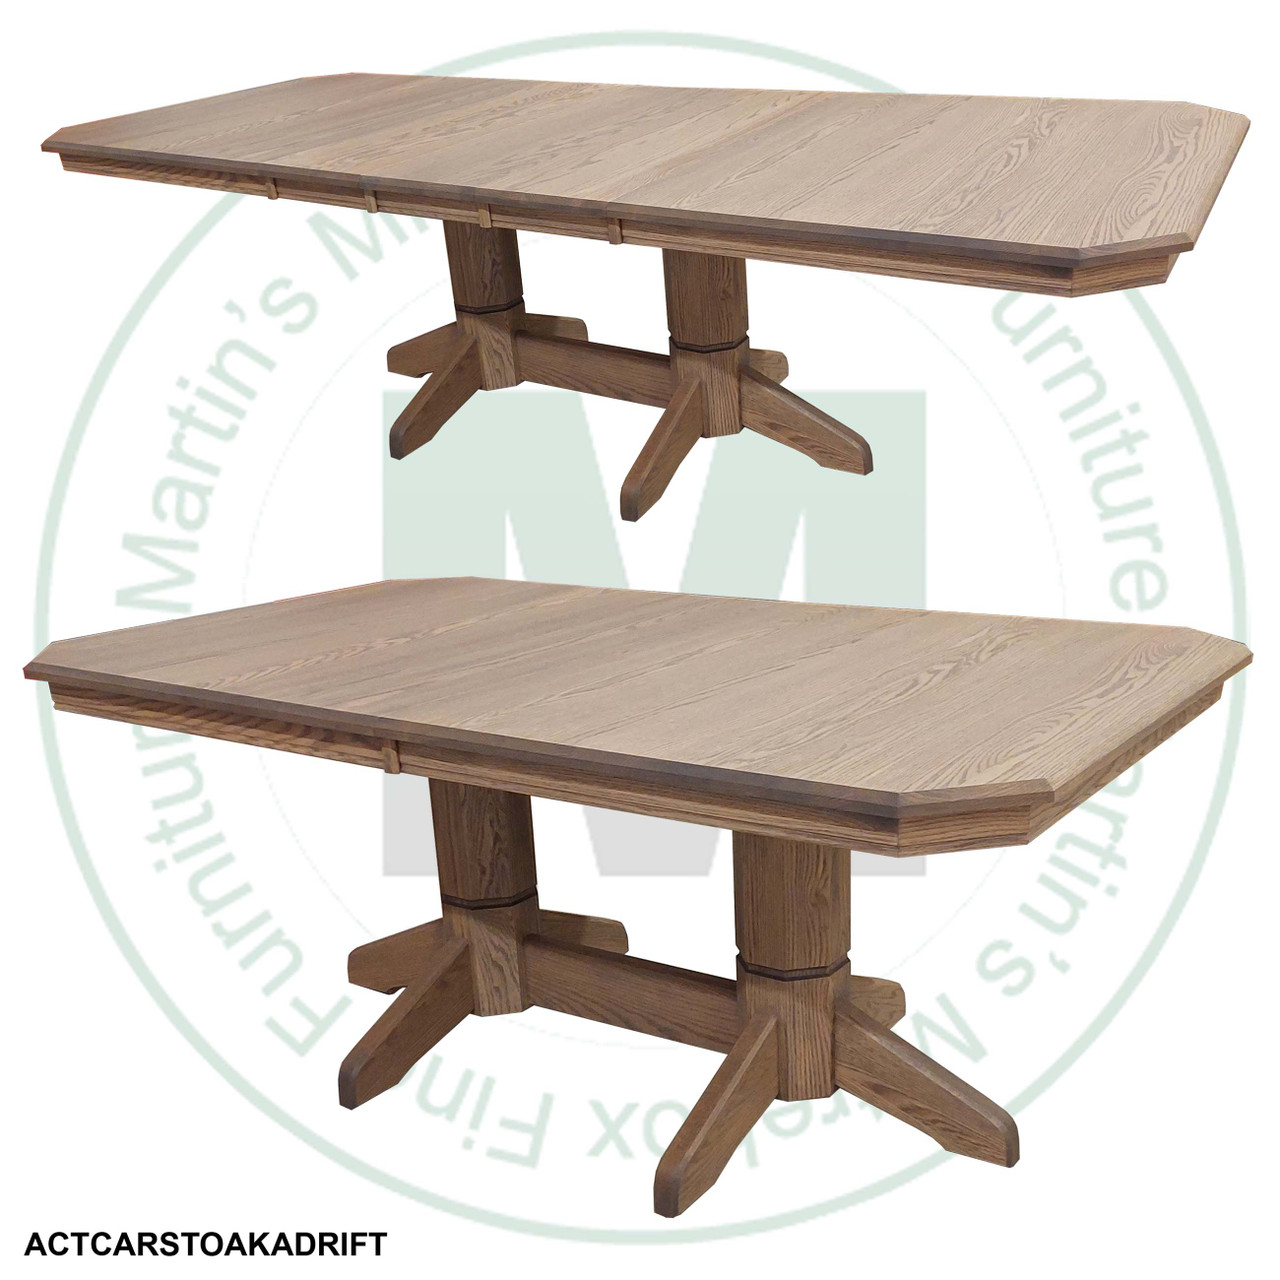 Maple Urban Classic Double Pedestal Table 48''D x 84''W x 30''H With 3 - 12'' Leaves